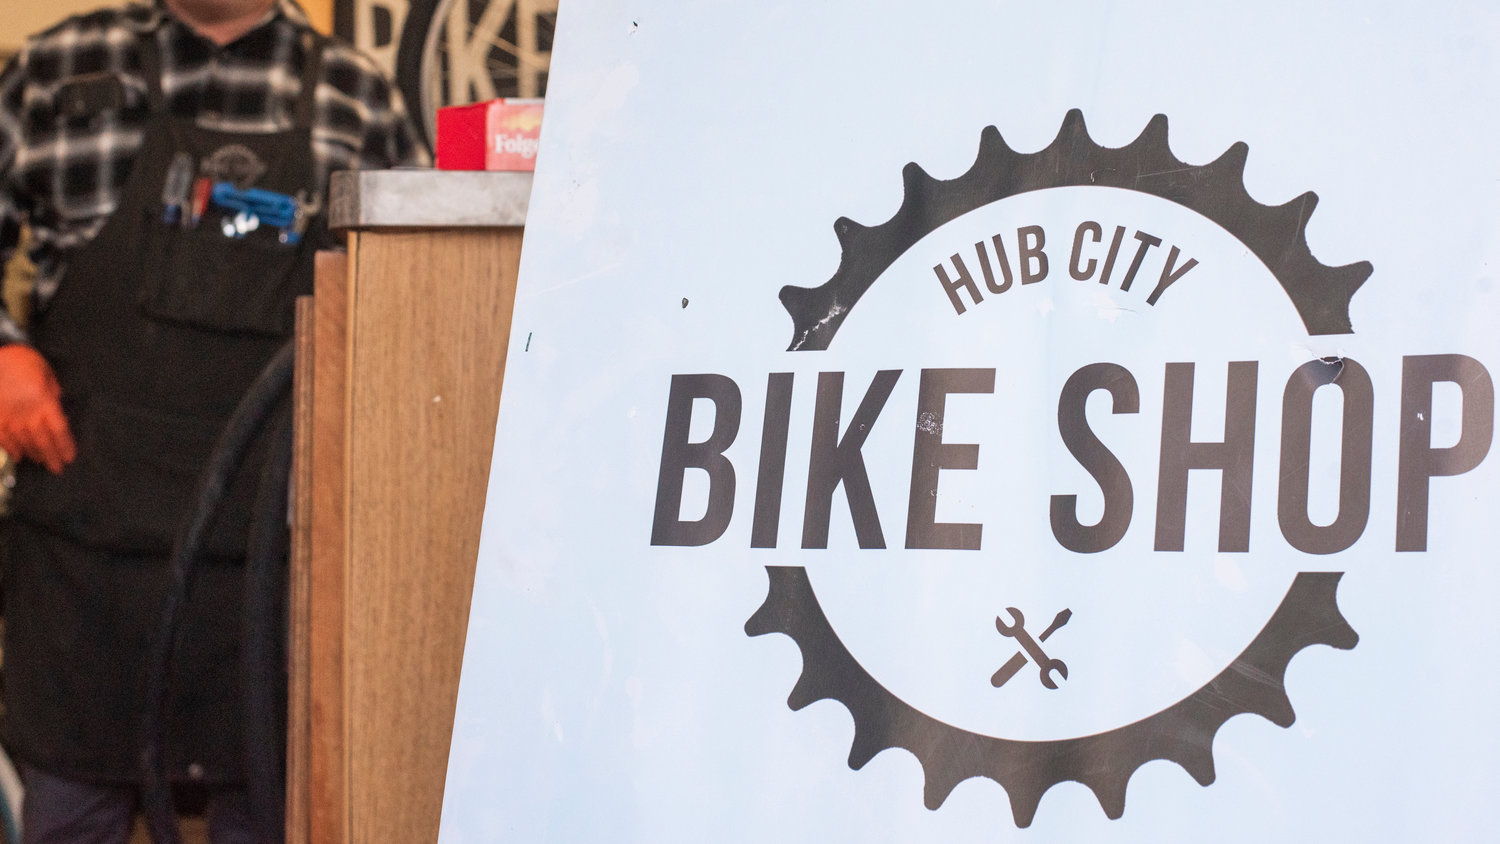 The Hub City Bike Shop is located in the 500 block of North Pearl Street in Centralia.